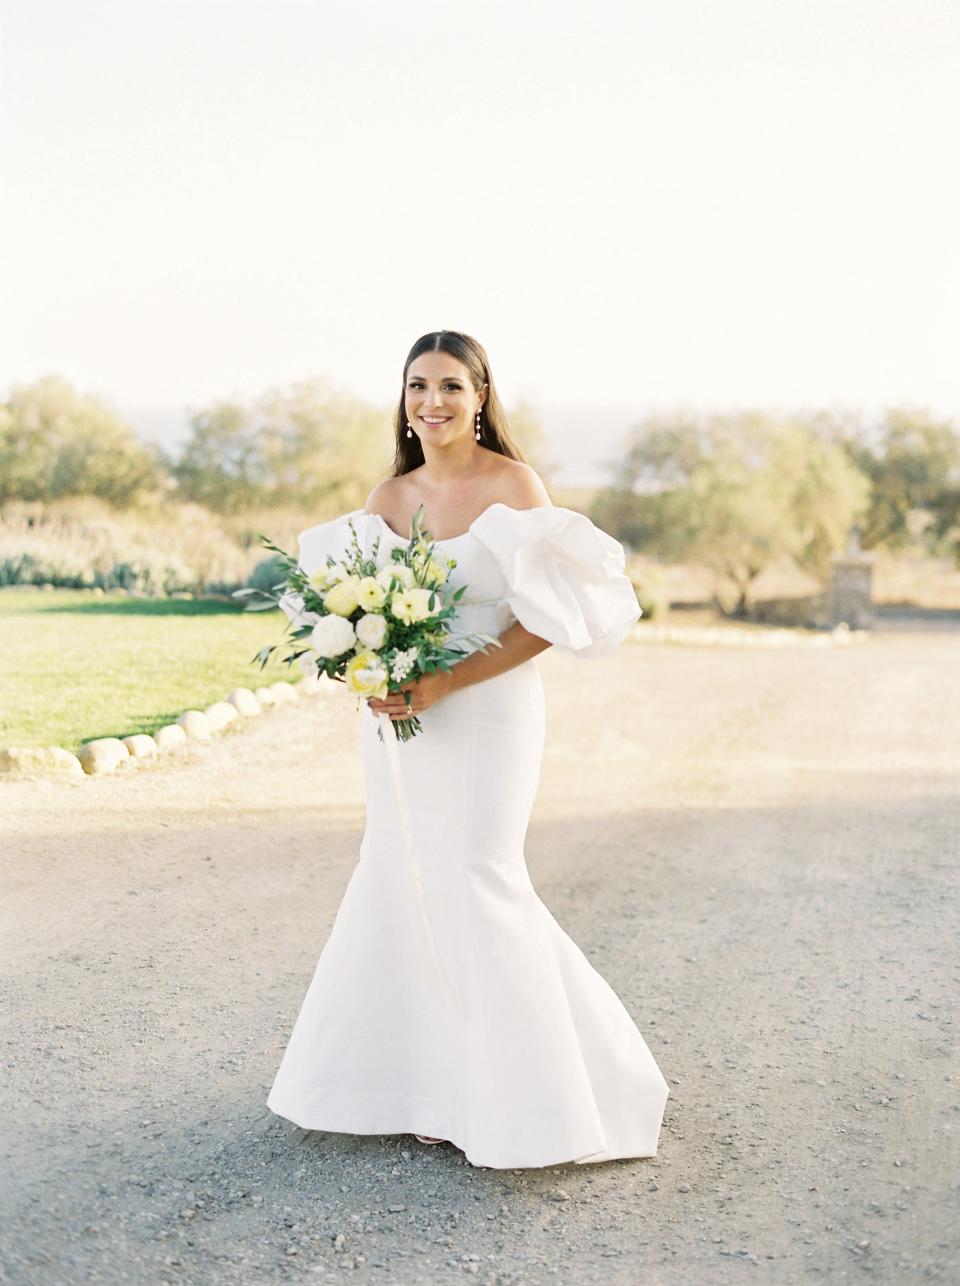 A bride stands in her wedding dress holding a bouquet of white and yellow flowers.